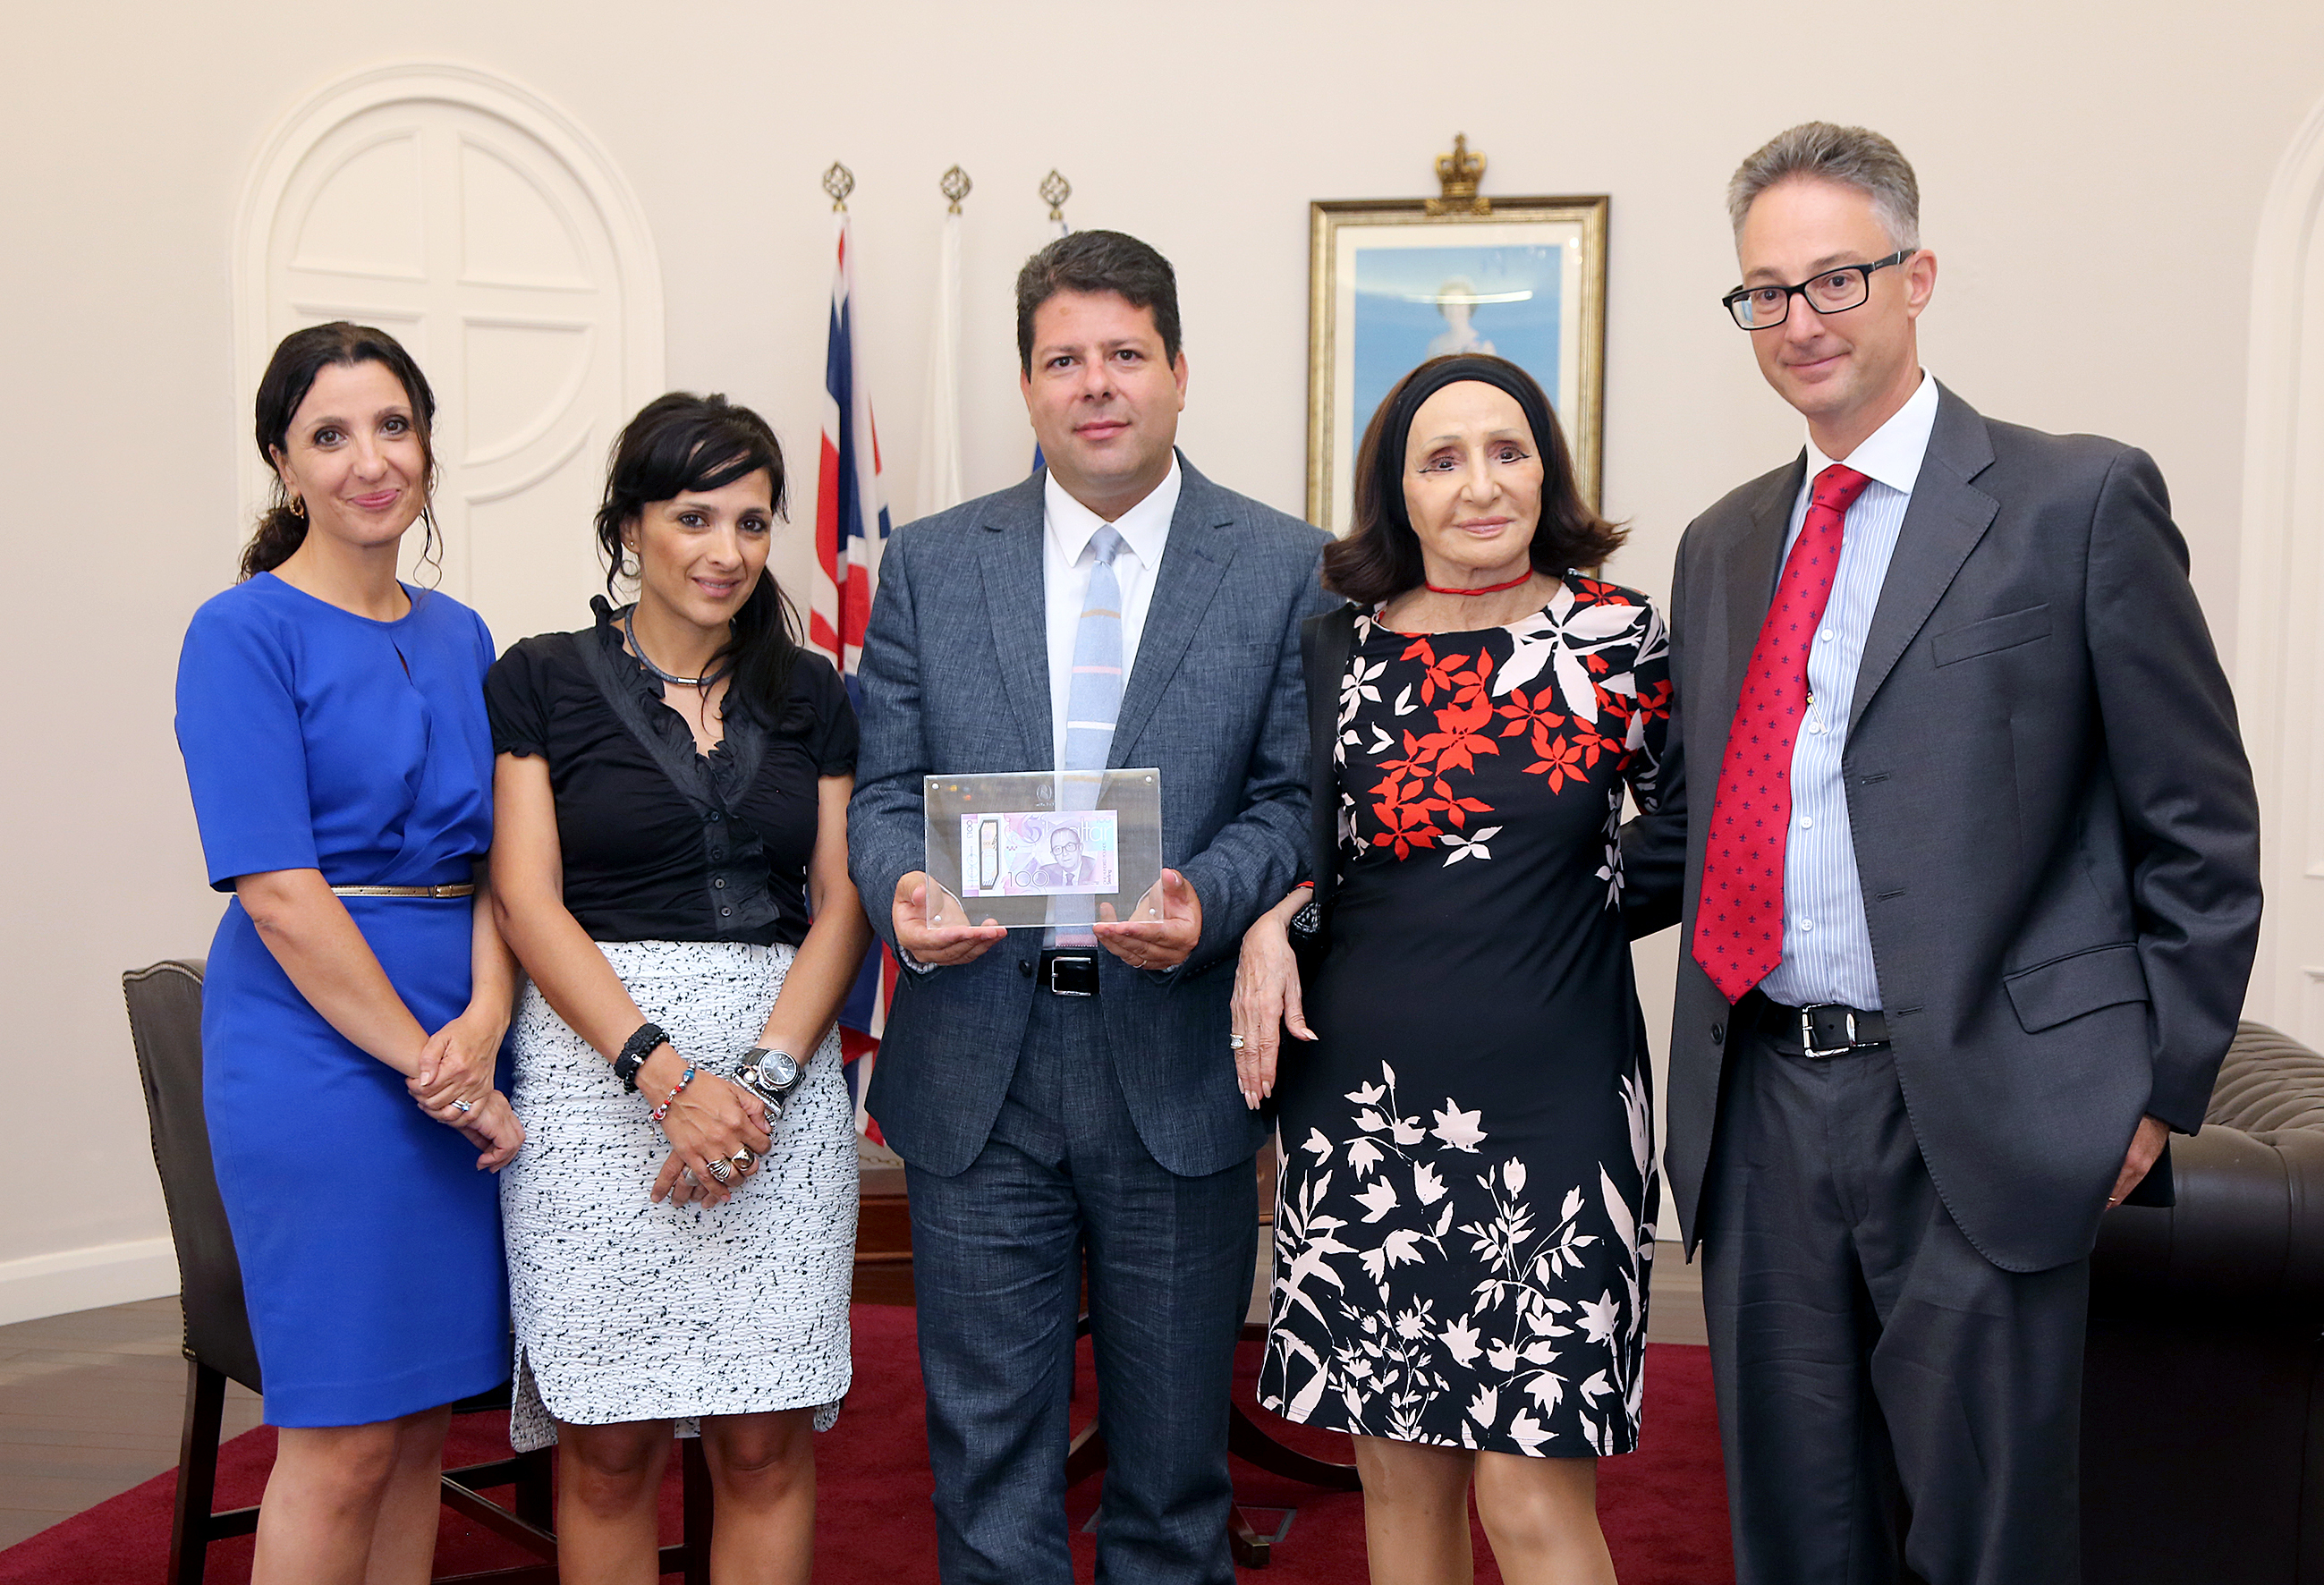 Chief Minister, Fabian Picardo, and Financial Secretary, Albert Mena show the new banknote (serial number C000001) to Lady Marcelle Hassan, Marlene Hassan-Nahon and Fleur Hassan- Nahoum.